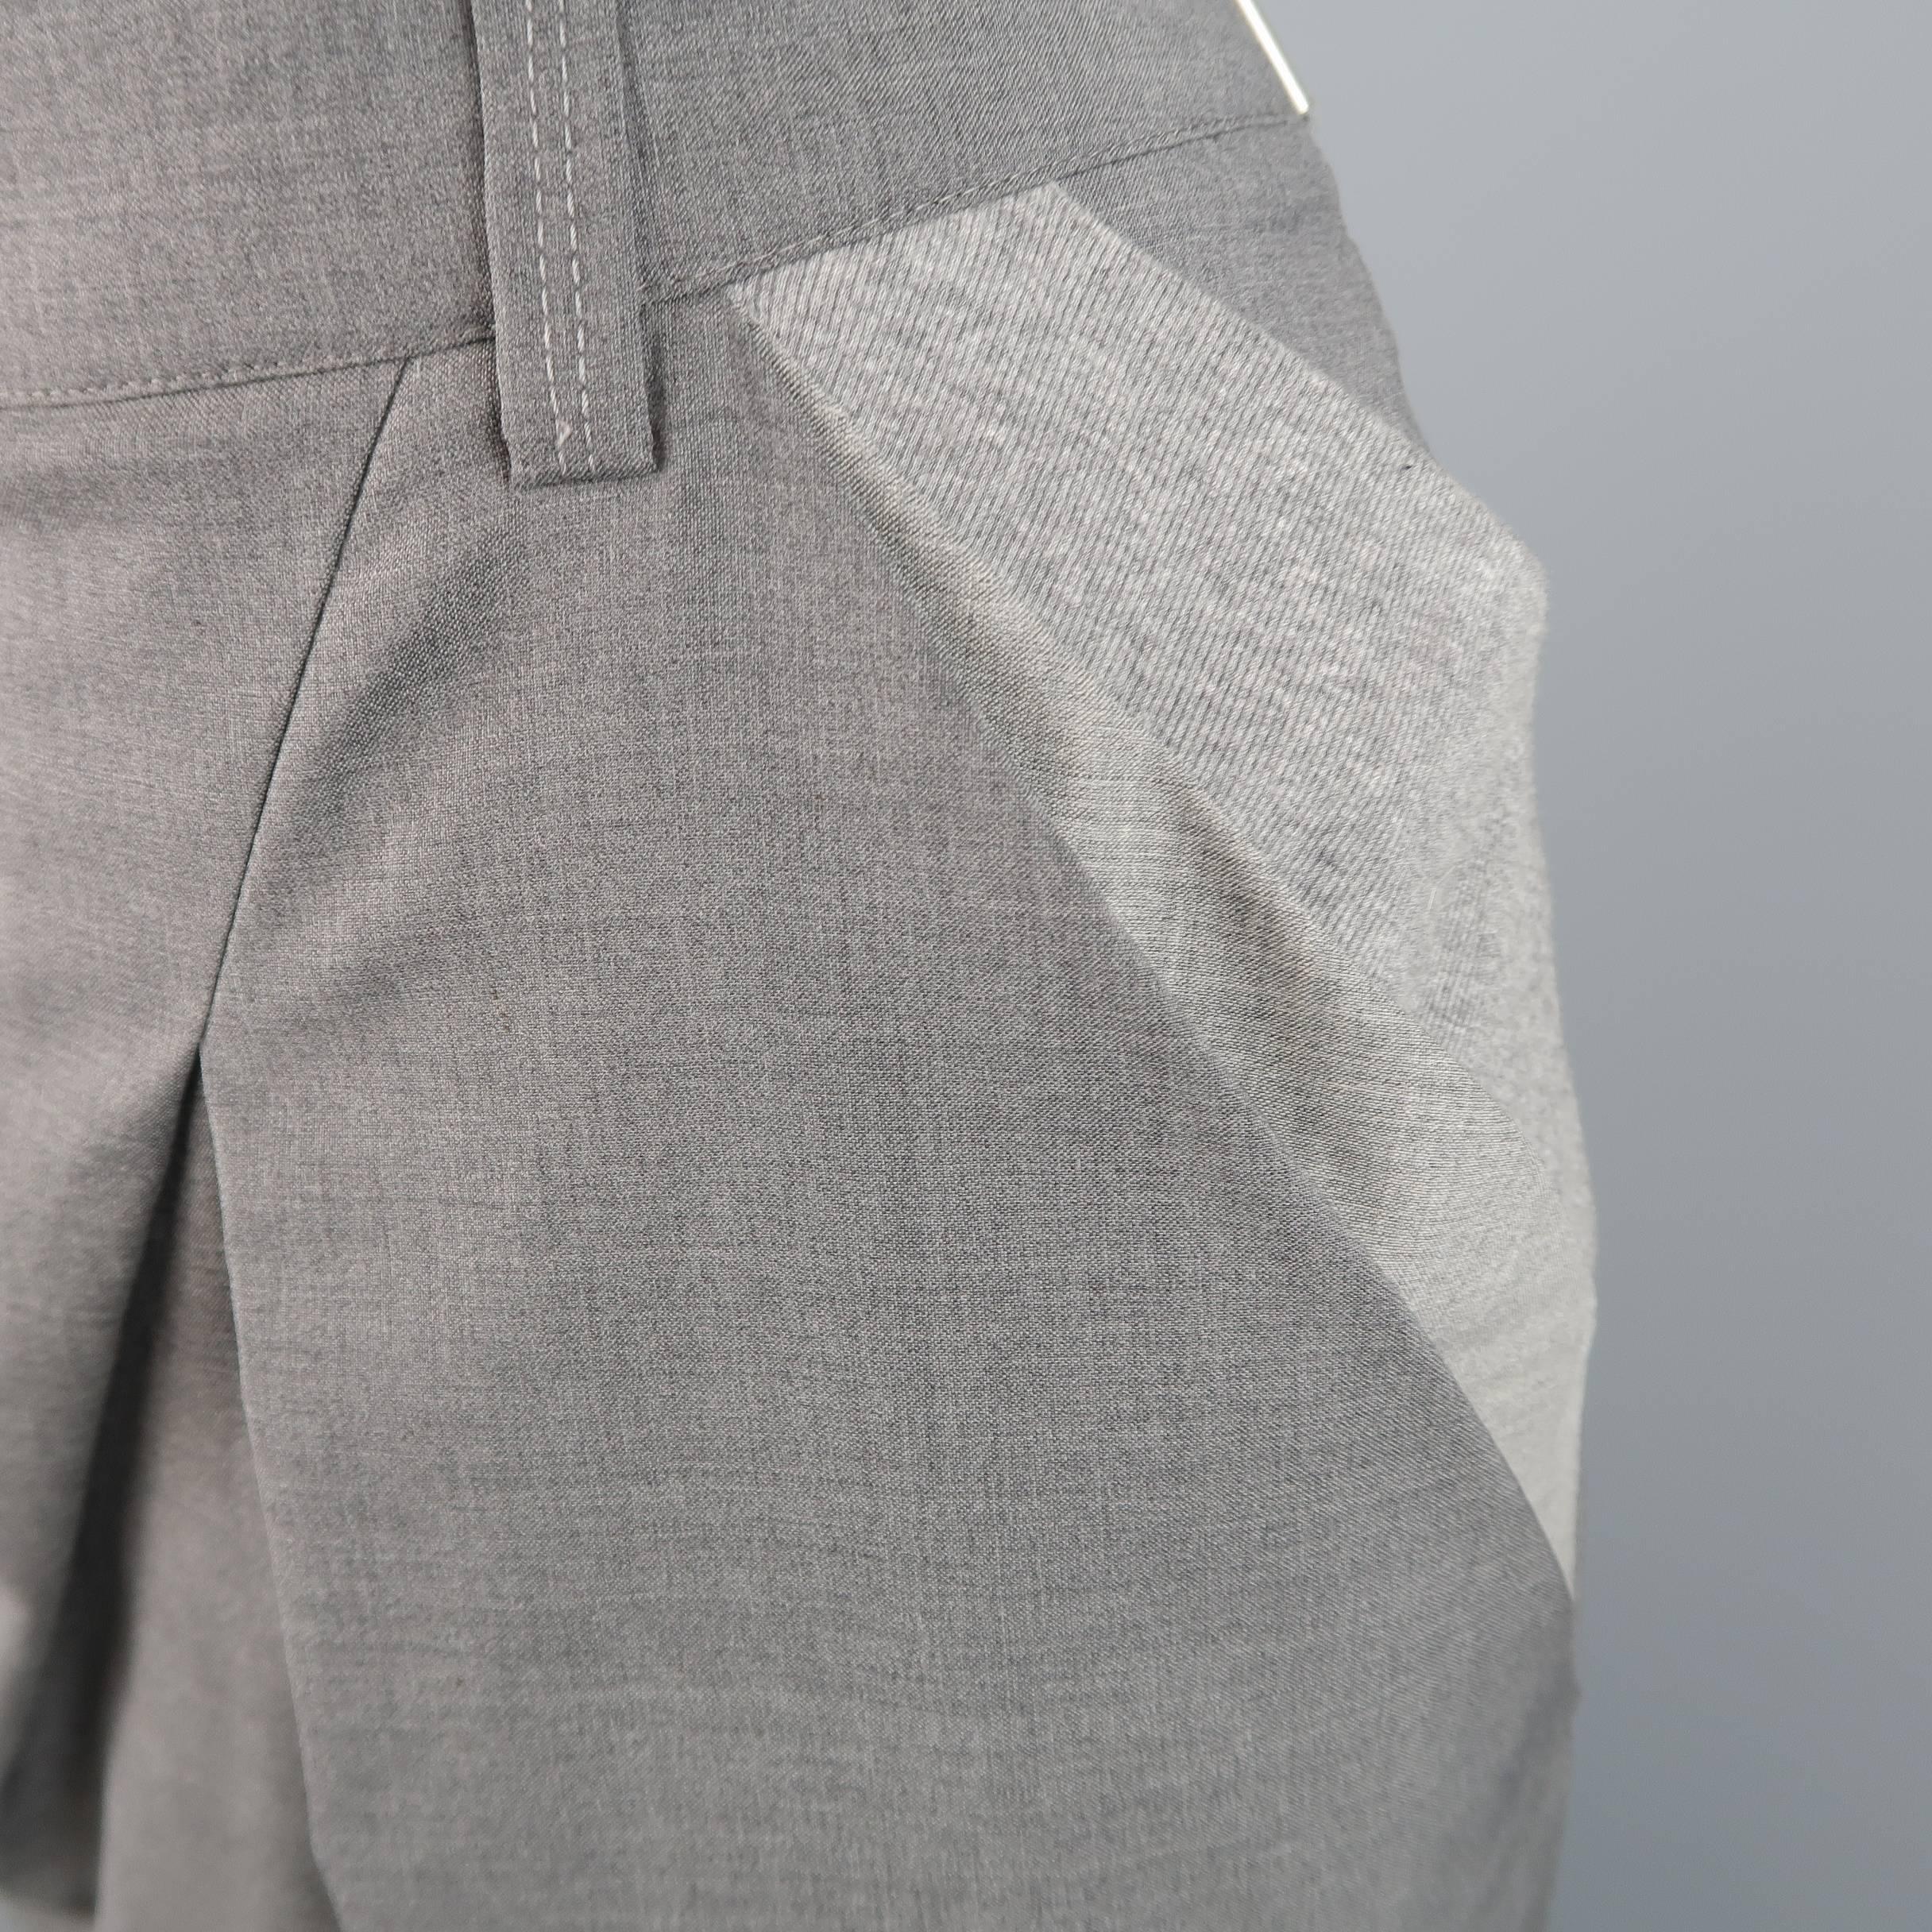 BRUNELLO CUCINELLI pencil skirt comes in heather gray wool and features a unique asymmetrical slanted pleat front with light gray ribbed knit color block panels. Made in Italy.
 
Excellent Pre-Owned Condition.
Marked: 4
 
Measurements:
 
Waist: 30.5